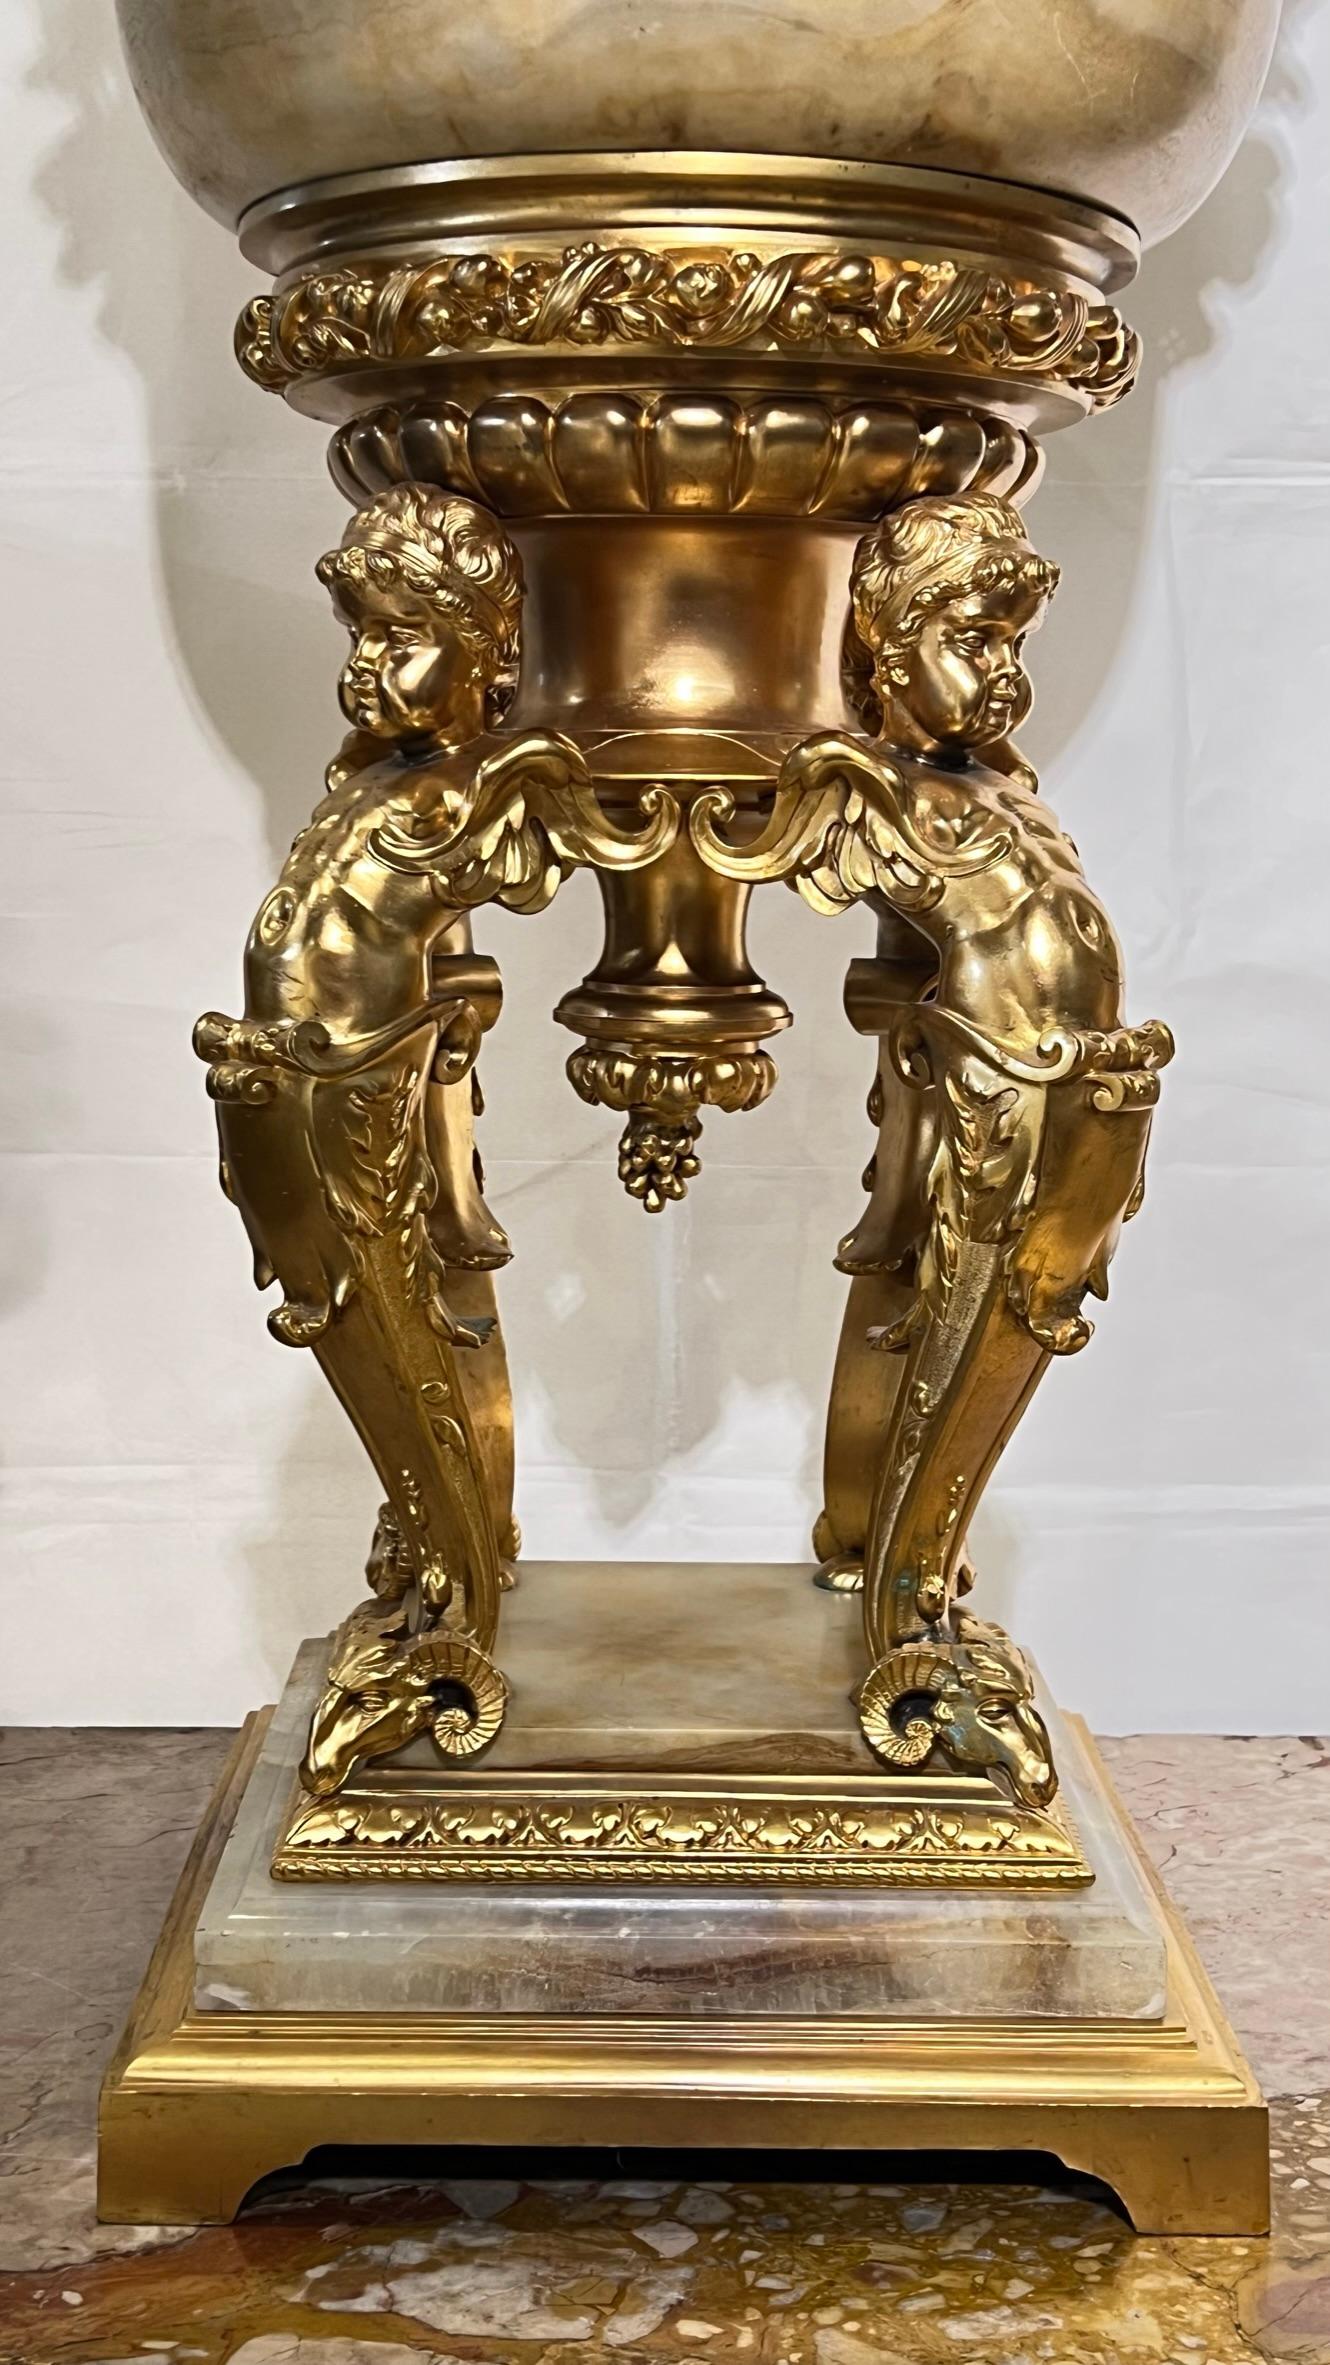 Monumental 19th Century French Neoclassical Onyx and Gilt Bronze Vase For Sale 4